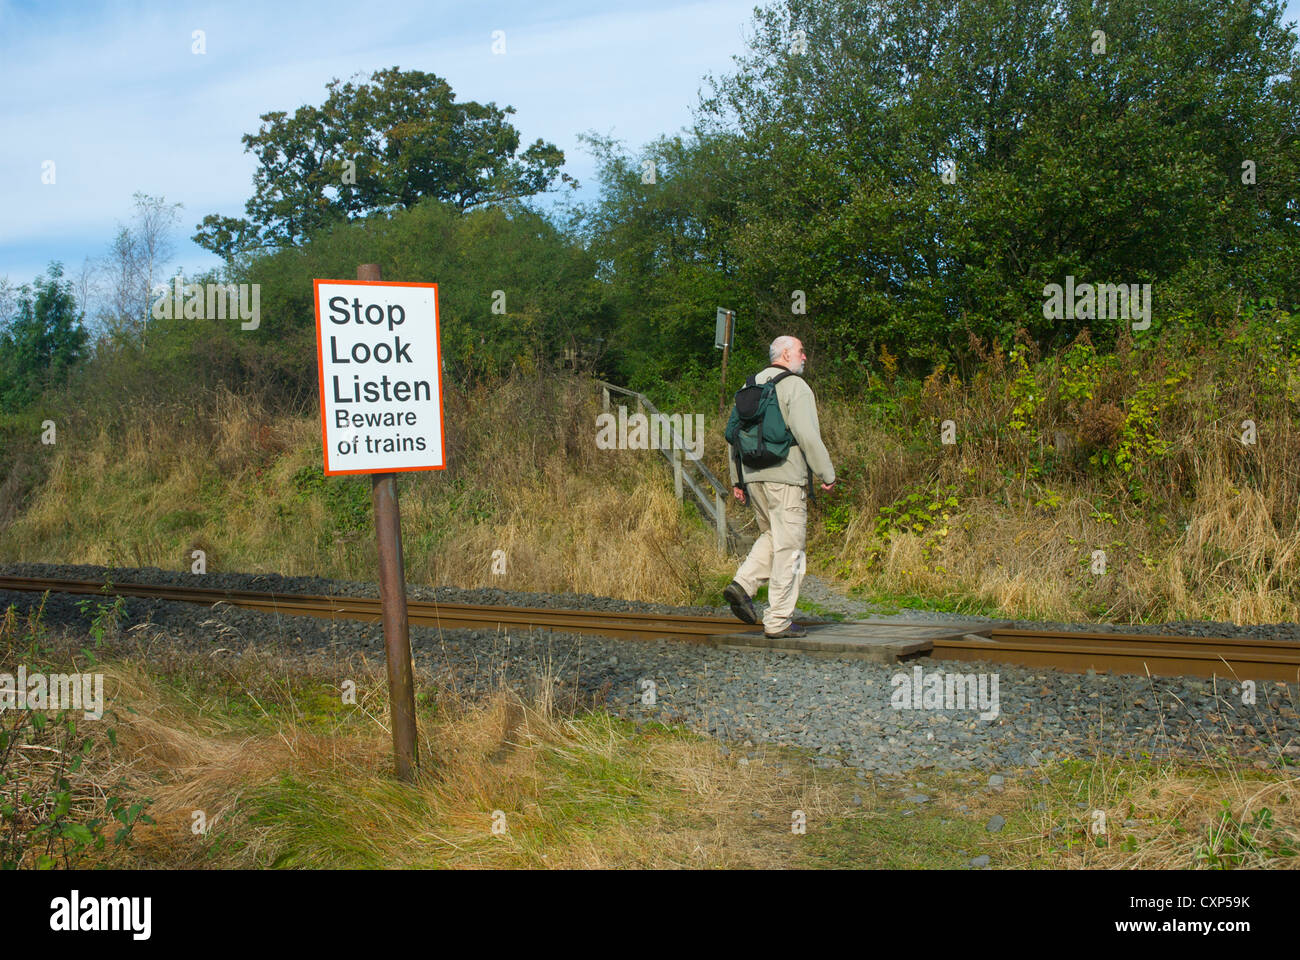 Man walking across railway line, with sign warning about the danger of trains Stock Photo